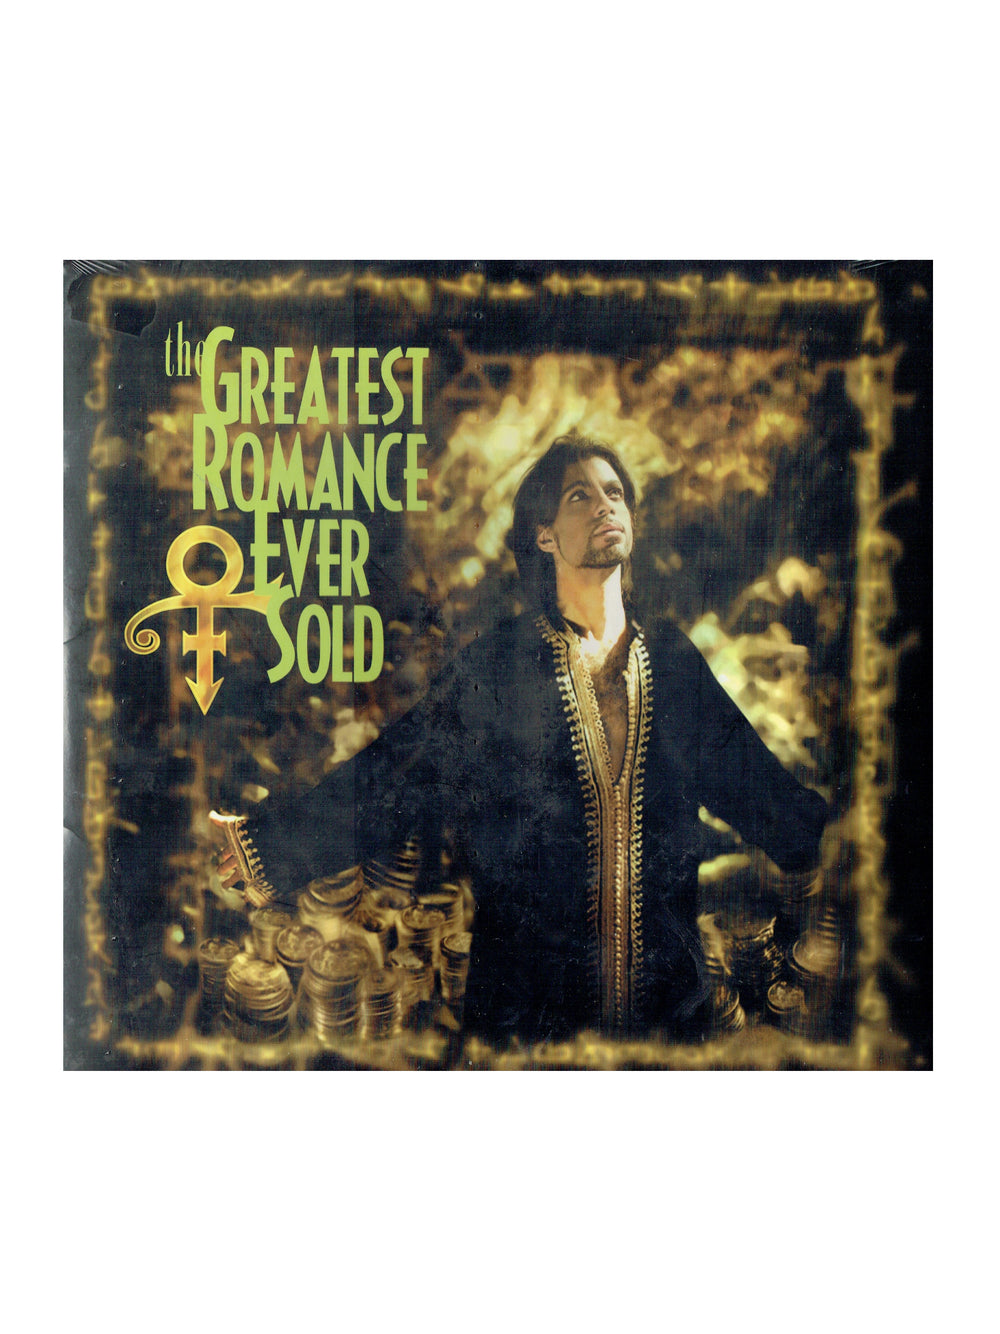 Prince – The Greatest Romance 2 X 12 Inch Vinyl 8 Tracks USA Release Sealed